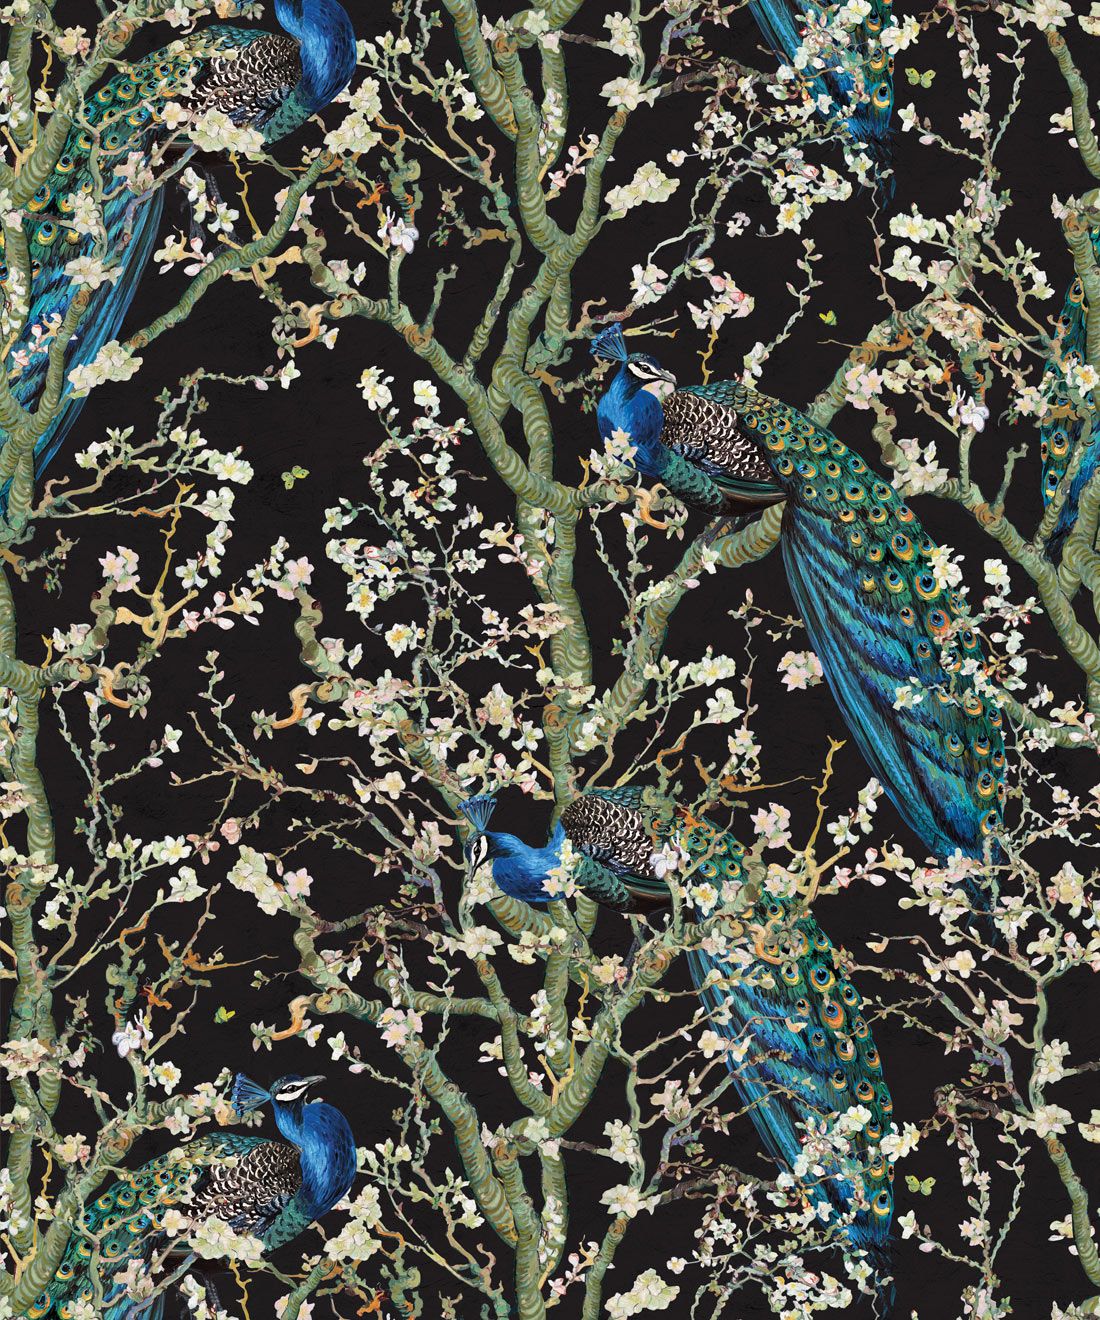 Almond Blossom Wallpaper • Chinoiserie Wallpaper • Wallpaper with Peacocks • Black Night Wallpaper • Swatch